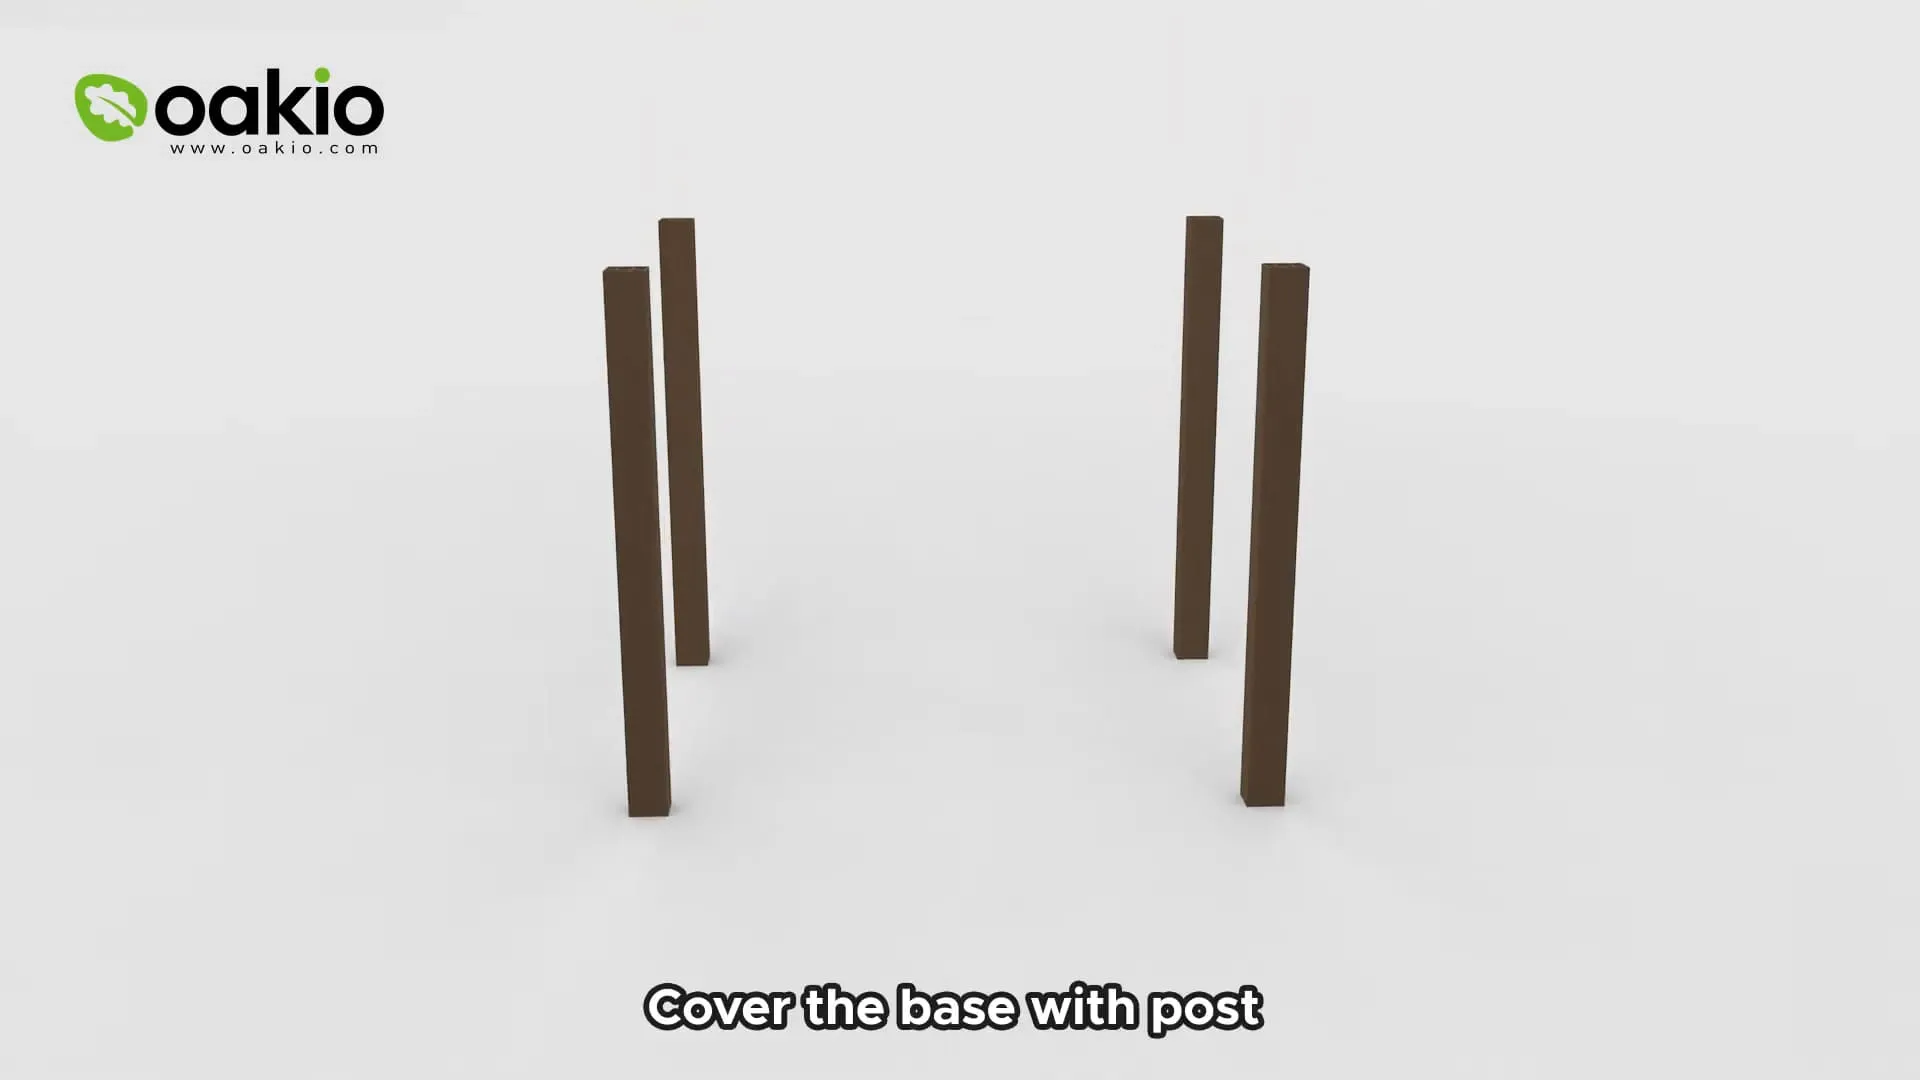 install the post